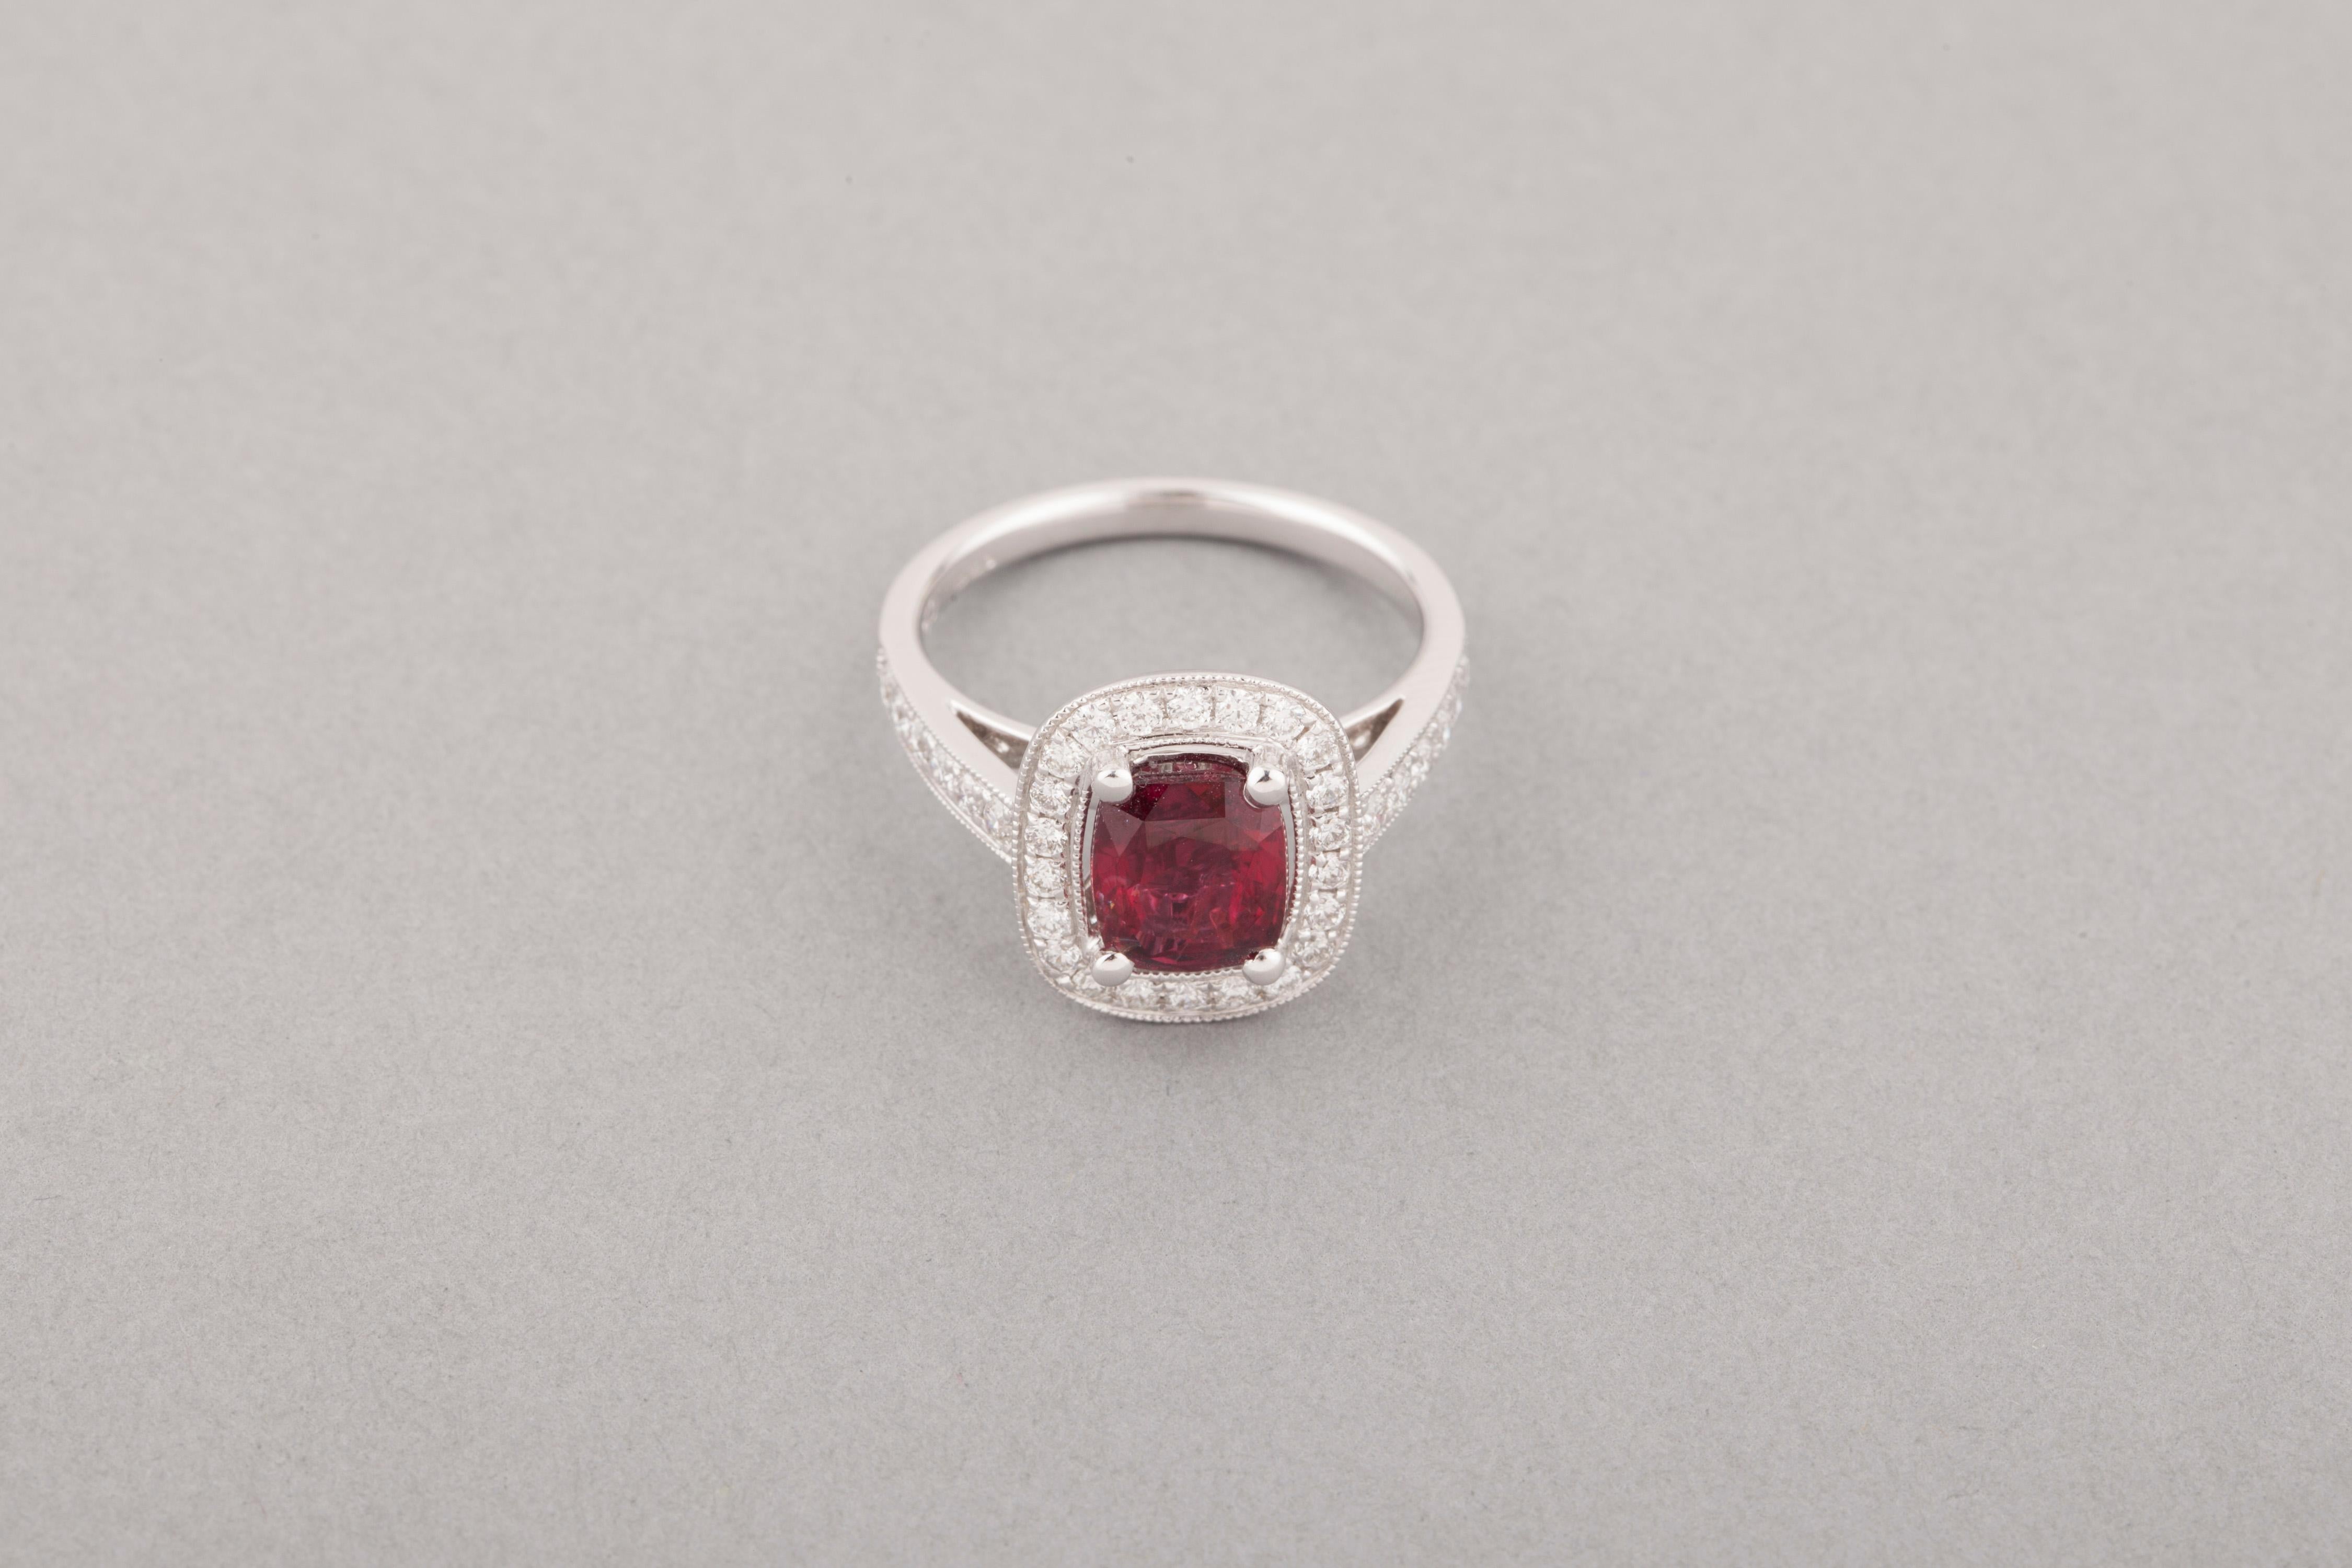 Certified 2.09 Carat Ruby and Diamonds Ring In New Condition For Sale In Saint-Ouen, FR